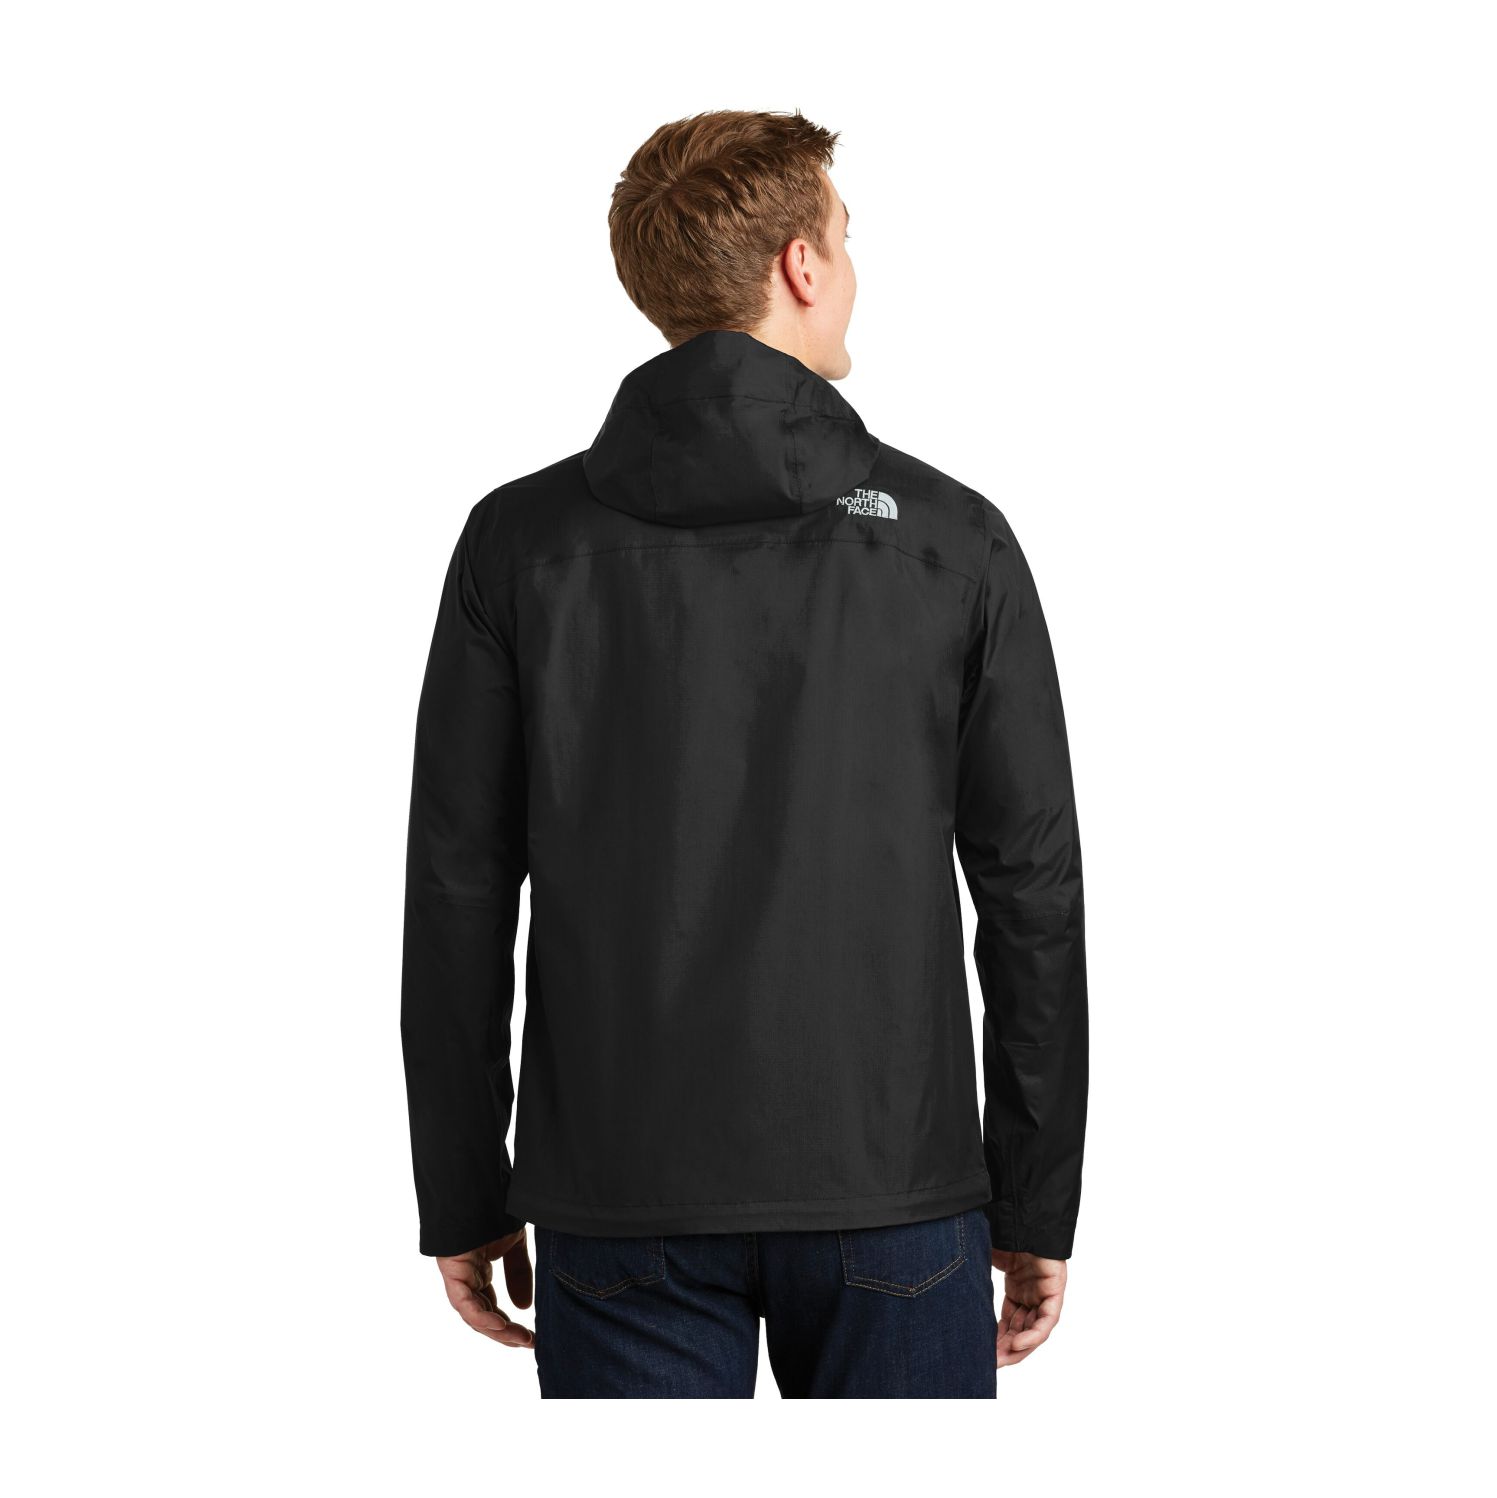 THE NORTH FACE DRYVENT RAIN JACKET #NF0A3LH4 Black Back